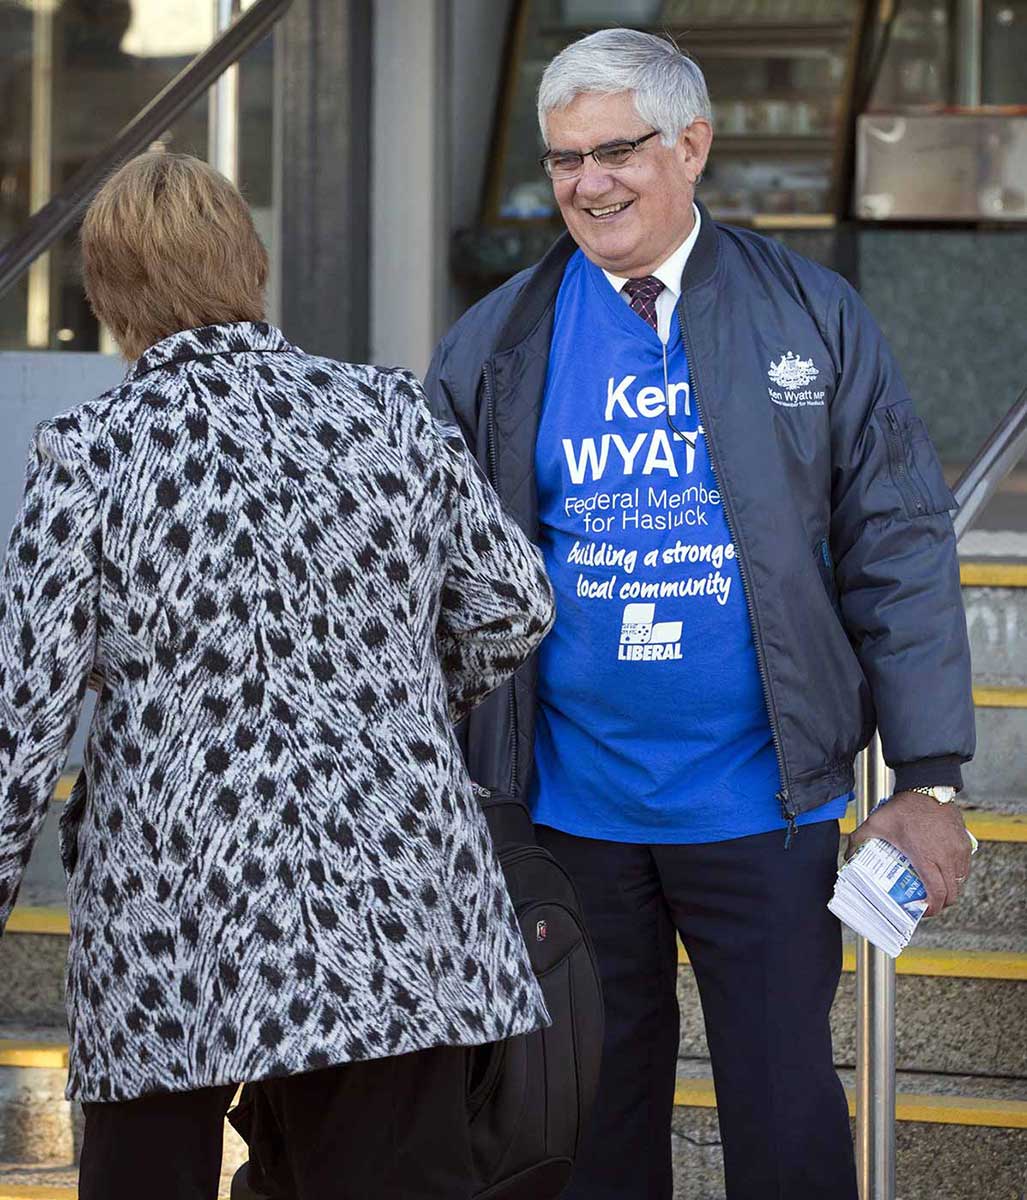 Member of Parliament Ken Wyatt greets a woman during his election campaign.